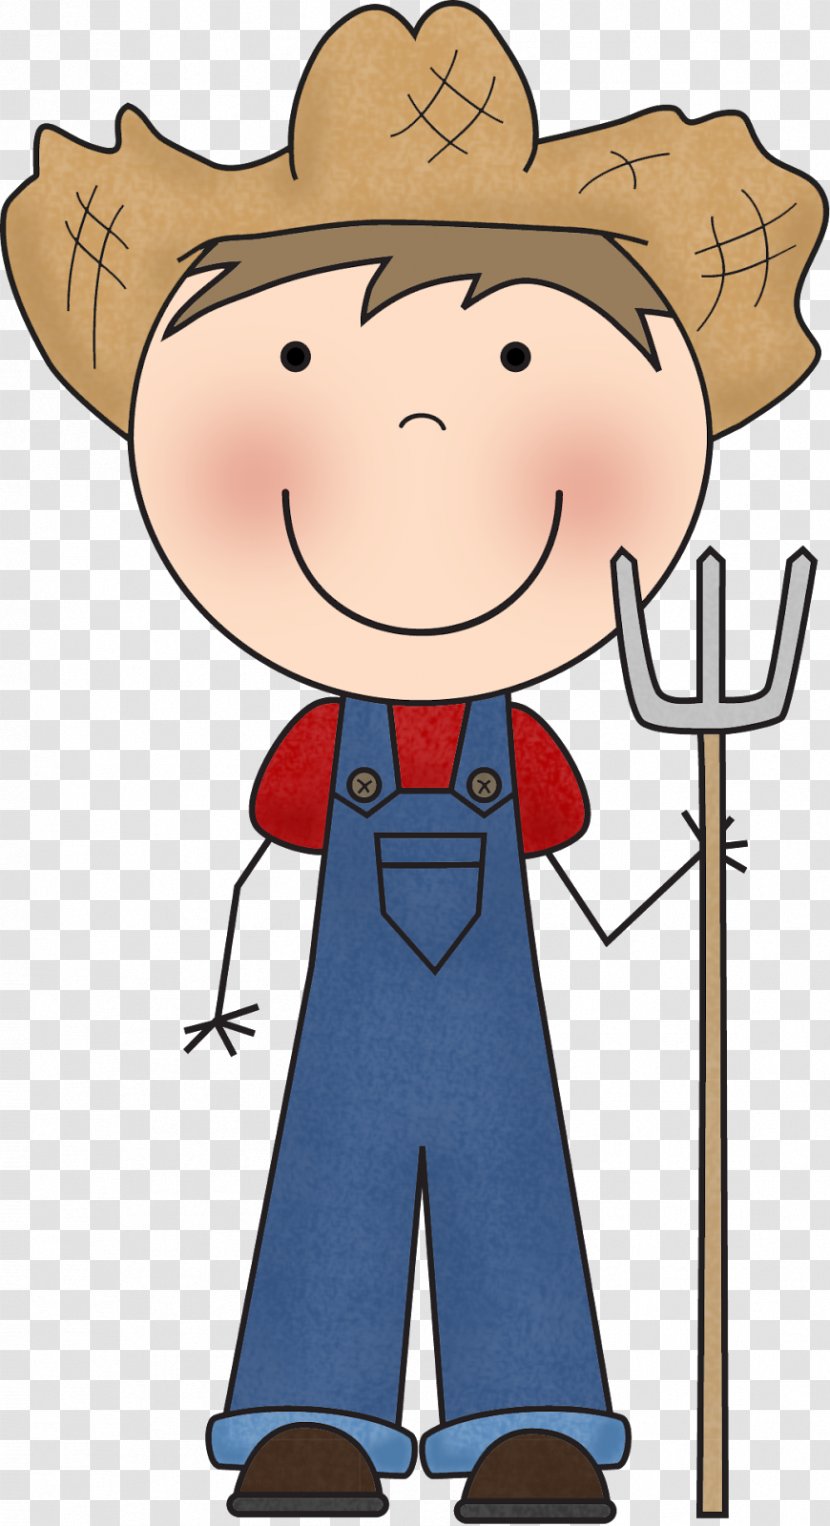 Cooking Cartoon - Doodle - Smile Pleased Transparent PNG